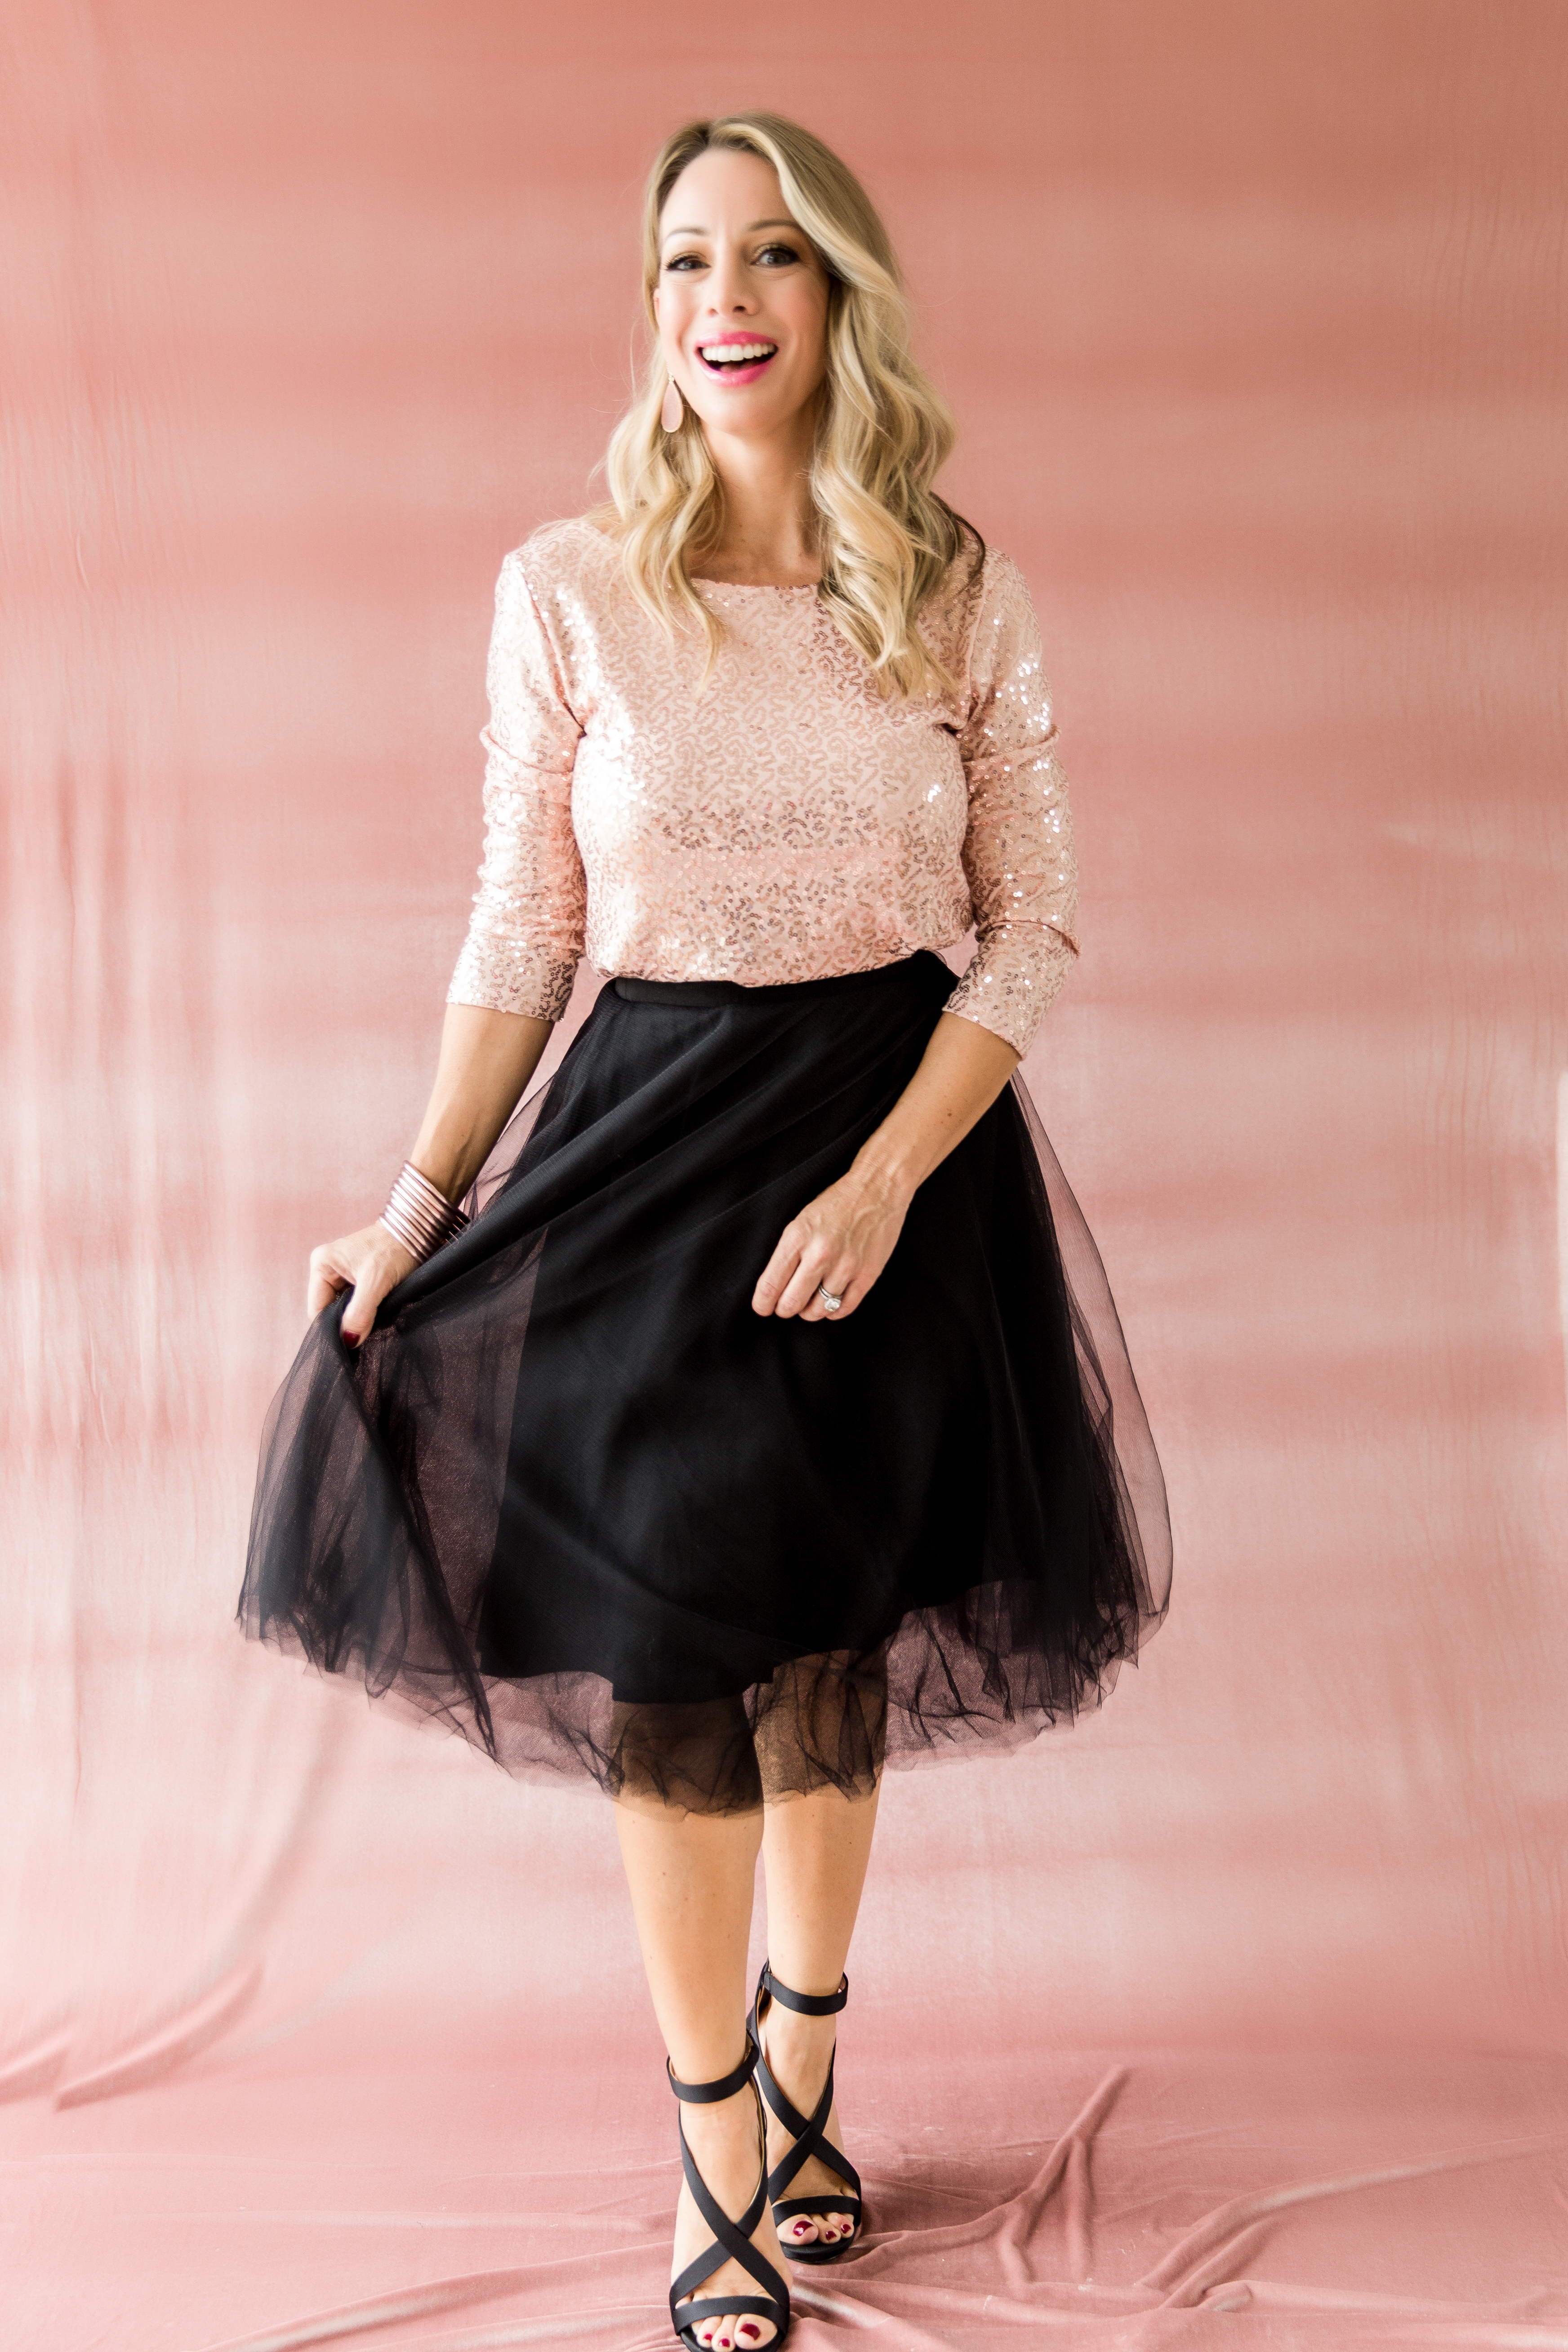  holiday outfit ideas from the gibson glam collect - the "megan" sequin top in blush